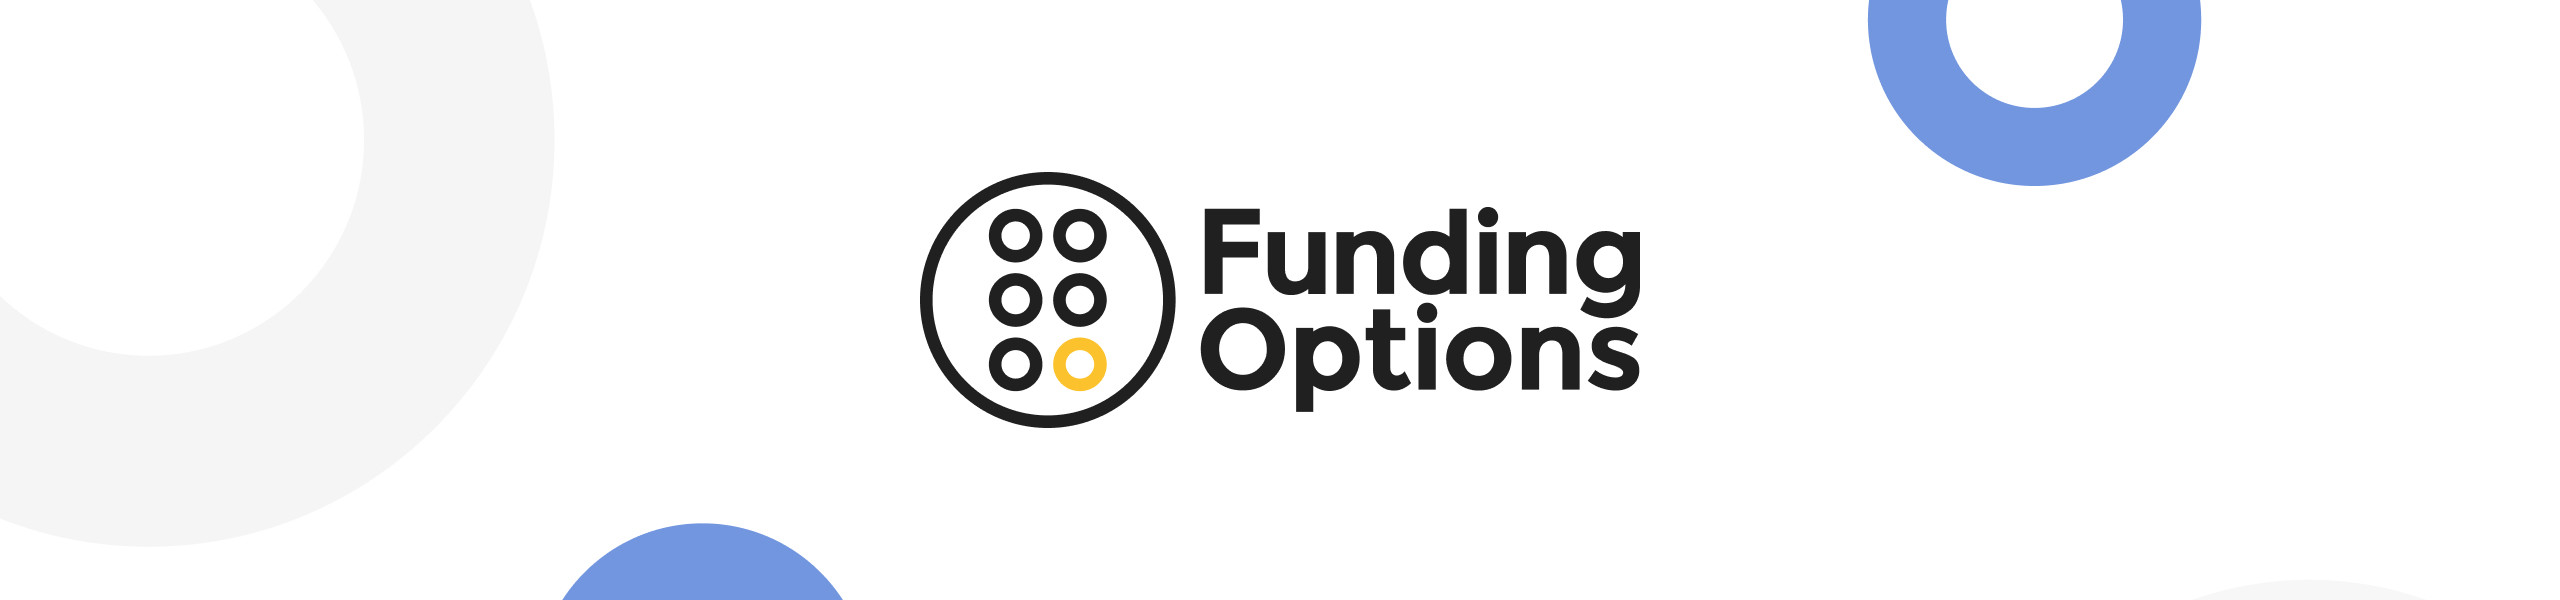 Funding Options bolsters leadership team with experienced CFO appointment 